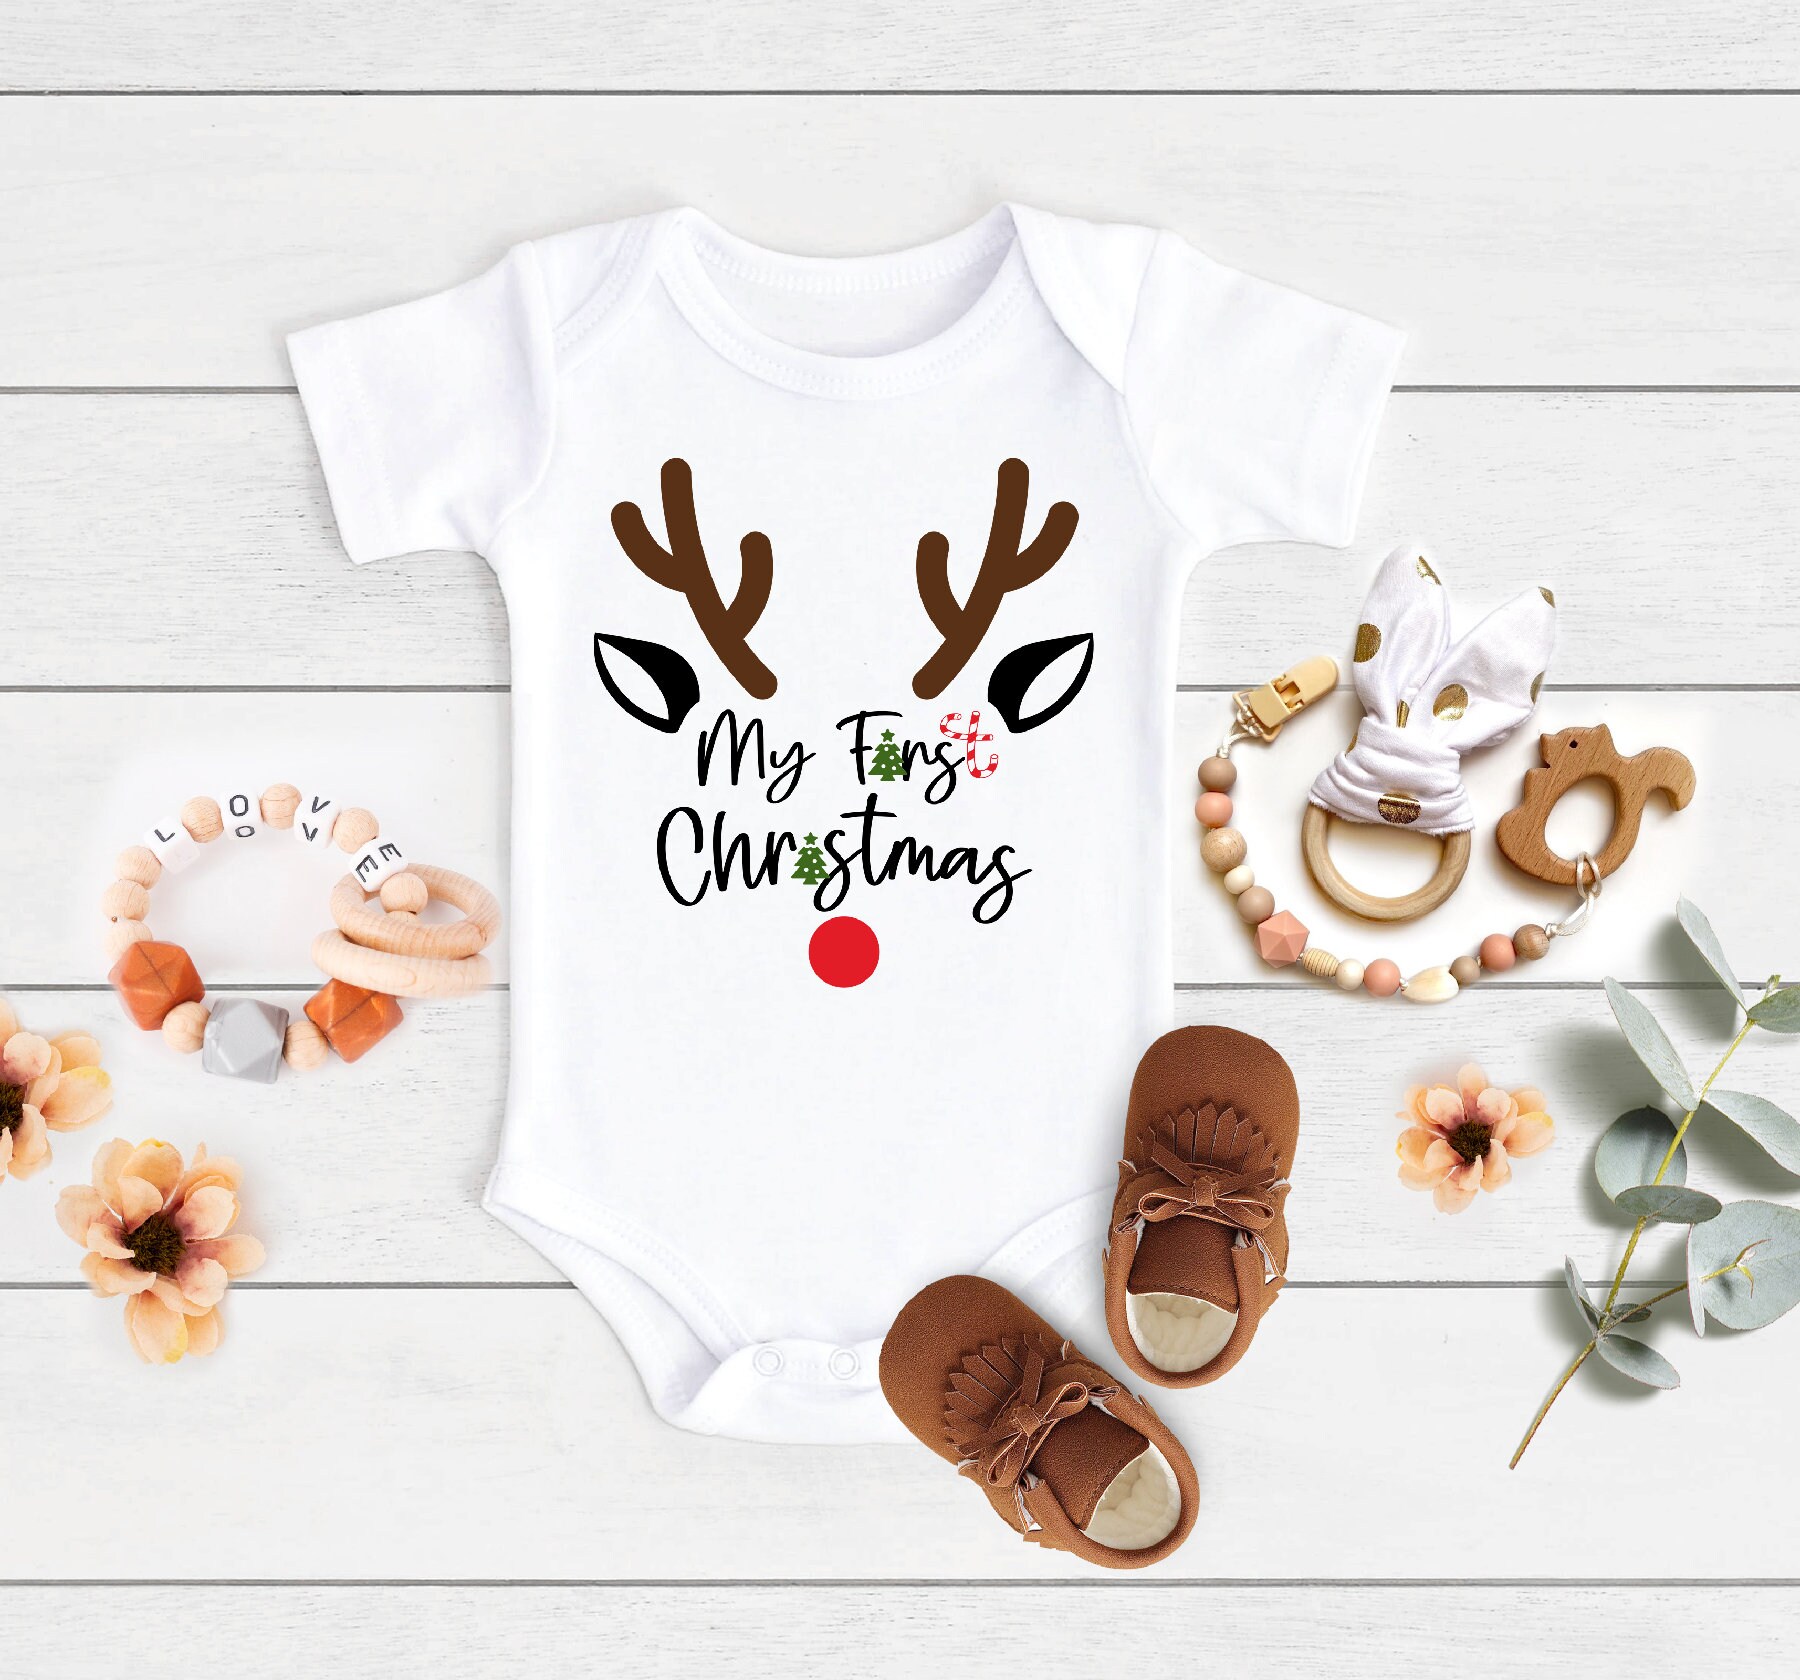 Discover First Christmas Onesie, 1st Christmas Onesie, Christmas Onesie, Baby Christmas Shirt, Cute Newborn Christmas Gift, Baby Christmas Gifts